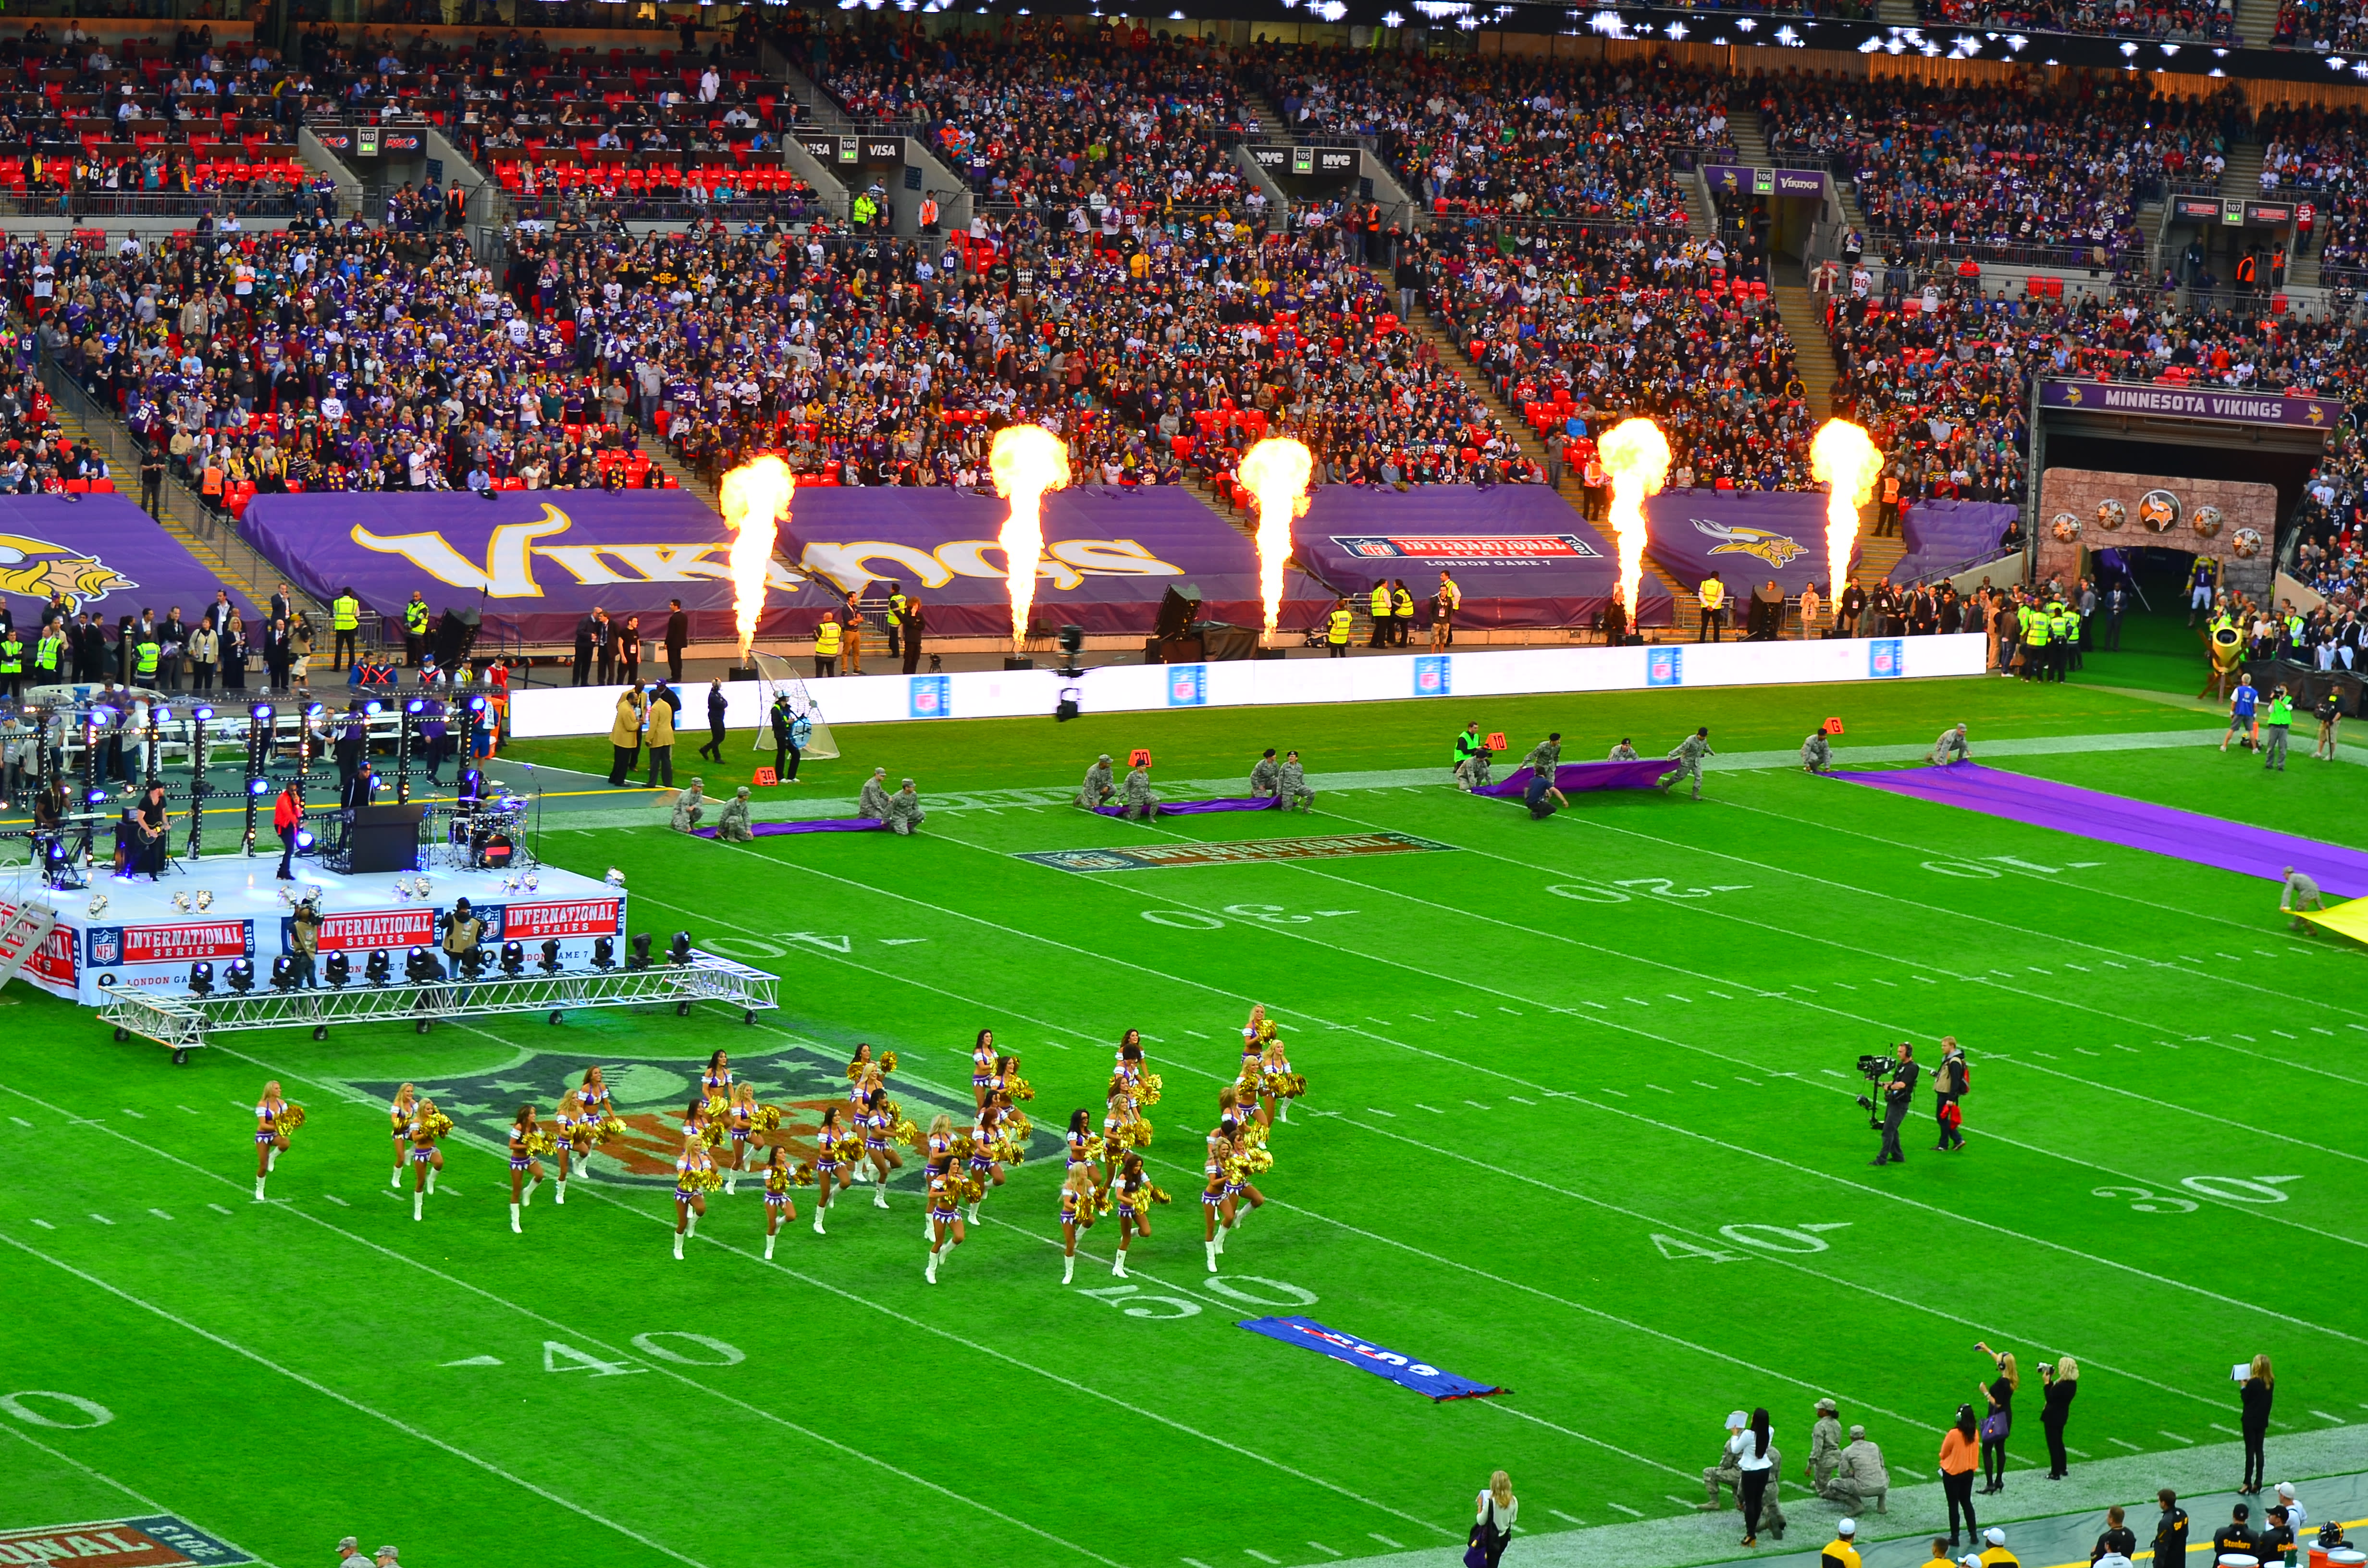 Tinie Tempah performs during halftime of the NFL London game in 2013 between the Minnesota Vikings and Pittsburgh Steelers.